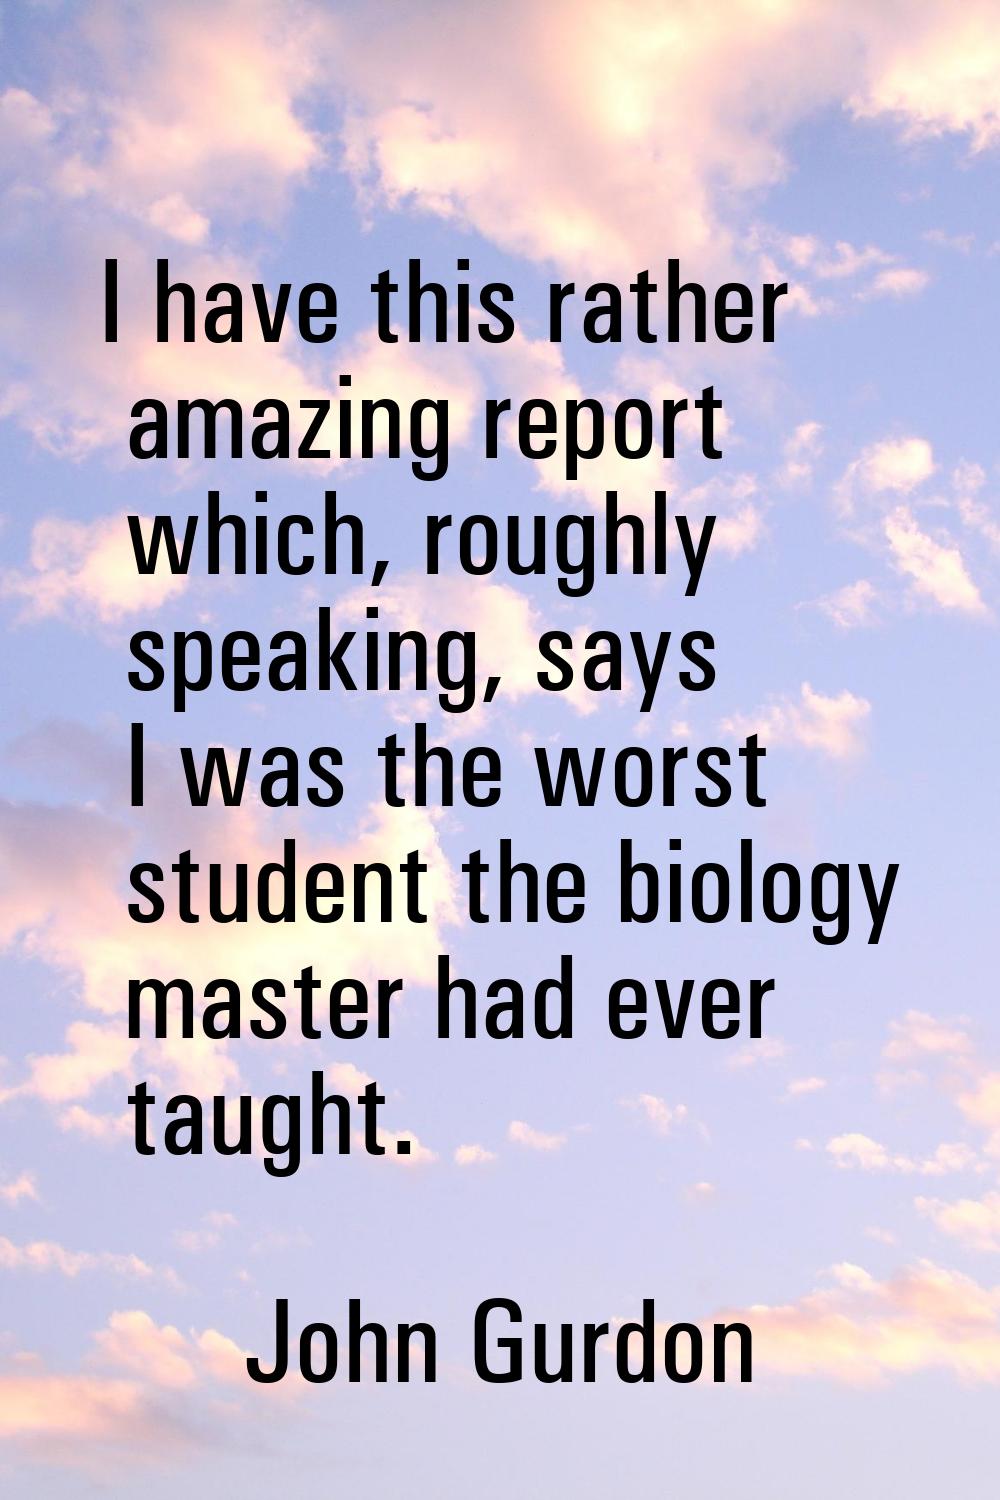 I have this rather amazing report which, roughly speaking, says I was the worst student the biology